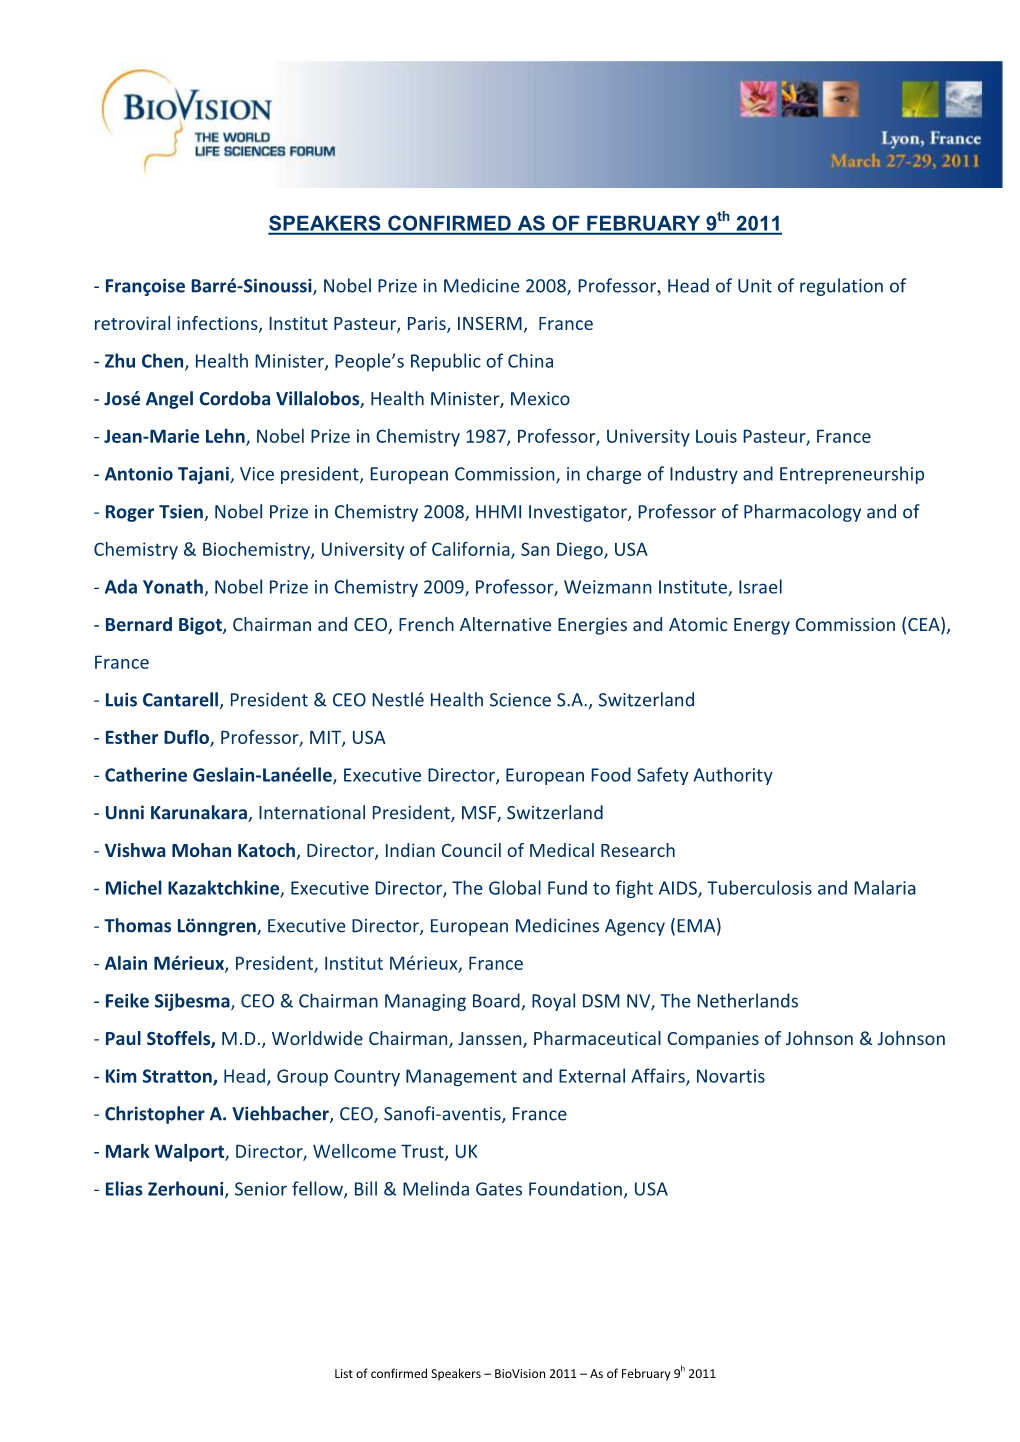 LIST of CONFIRMED SPEAKERS 9Th FEBRUARY